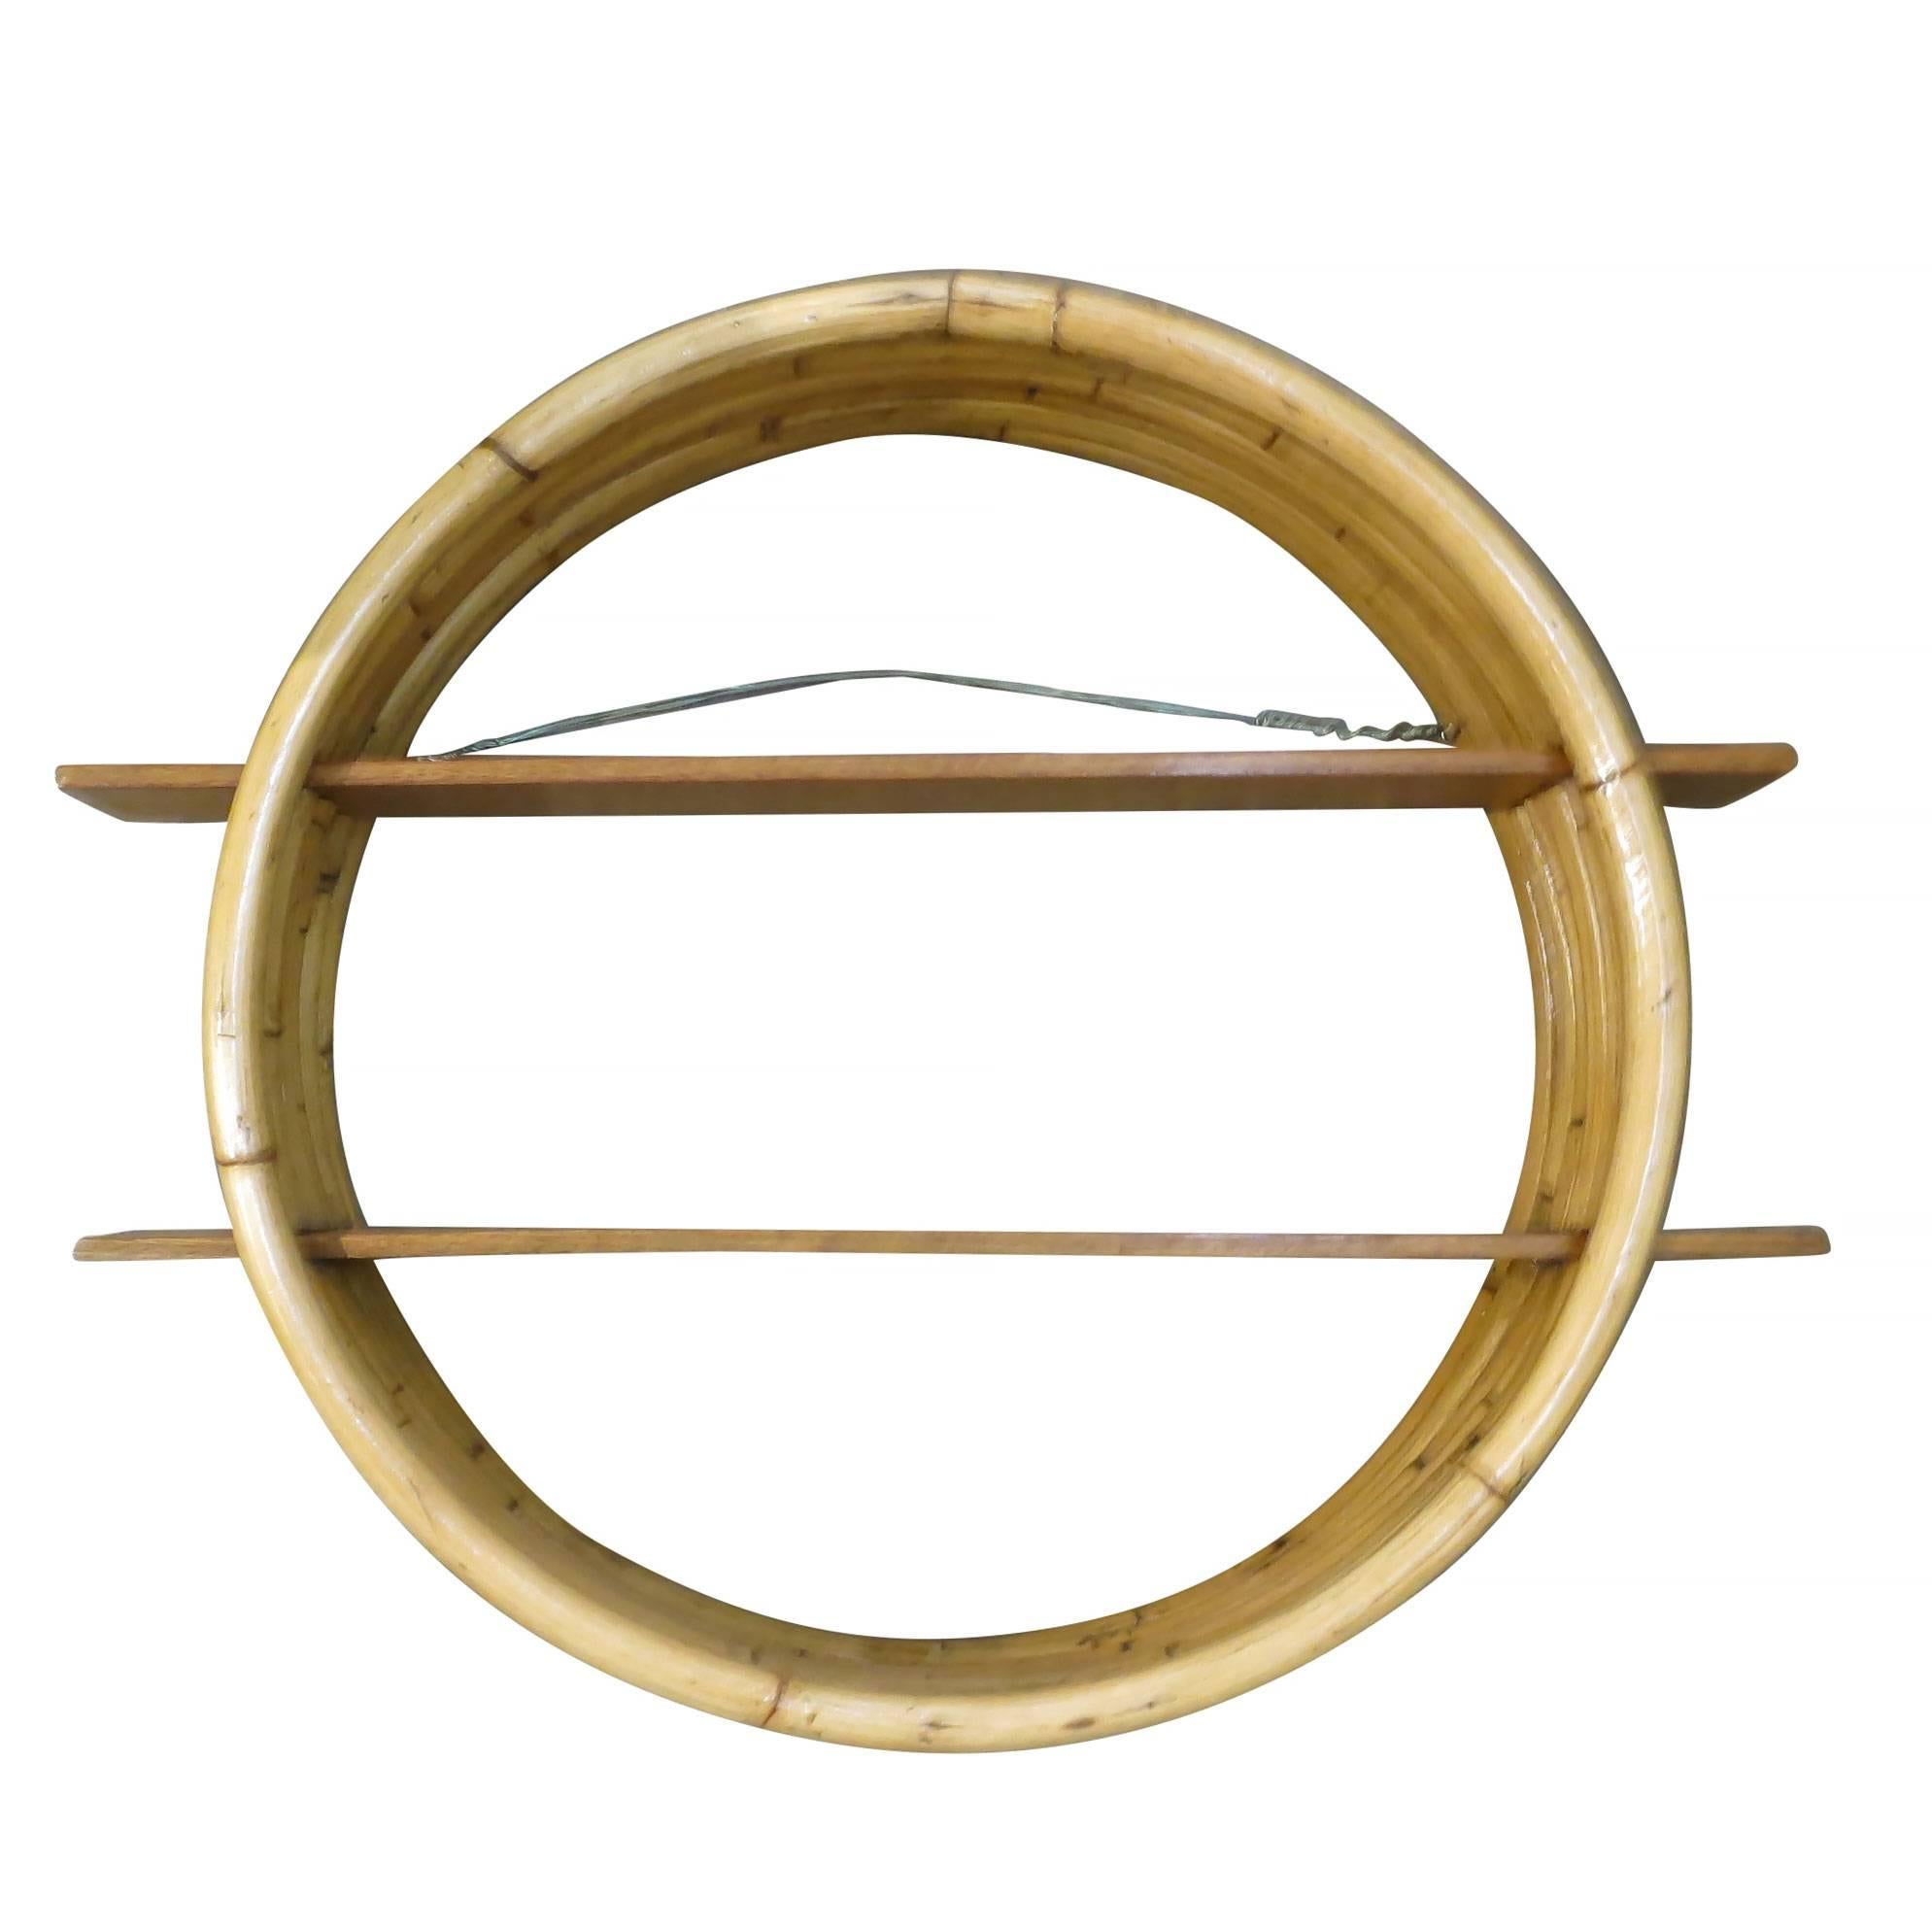 Circular rattan wall self, circa 1950. This rare rattan wall shelf features unique 5 strand stack rattan frame made with cut-out sections which hold two mahogany shelves.

All rattan, bamboo and wicker has been painstakingly refurbished using the